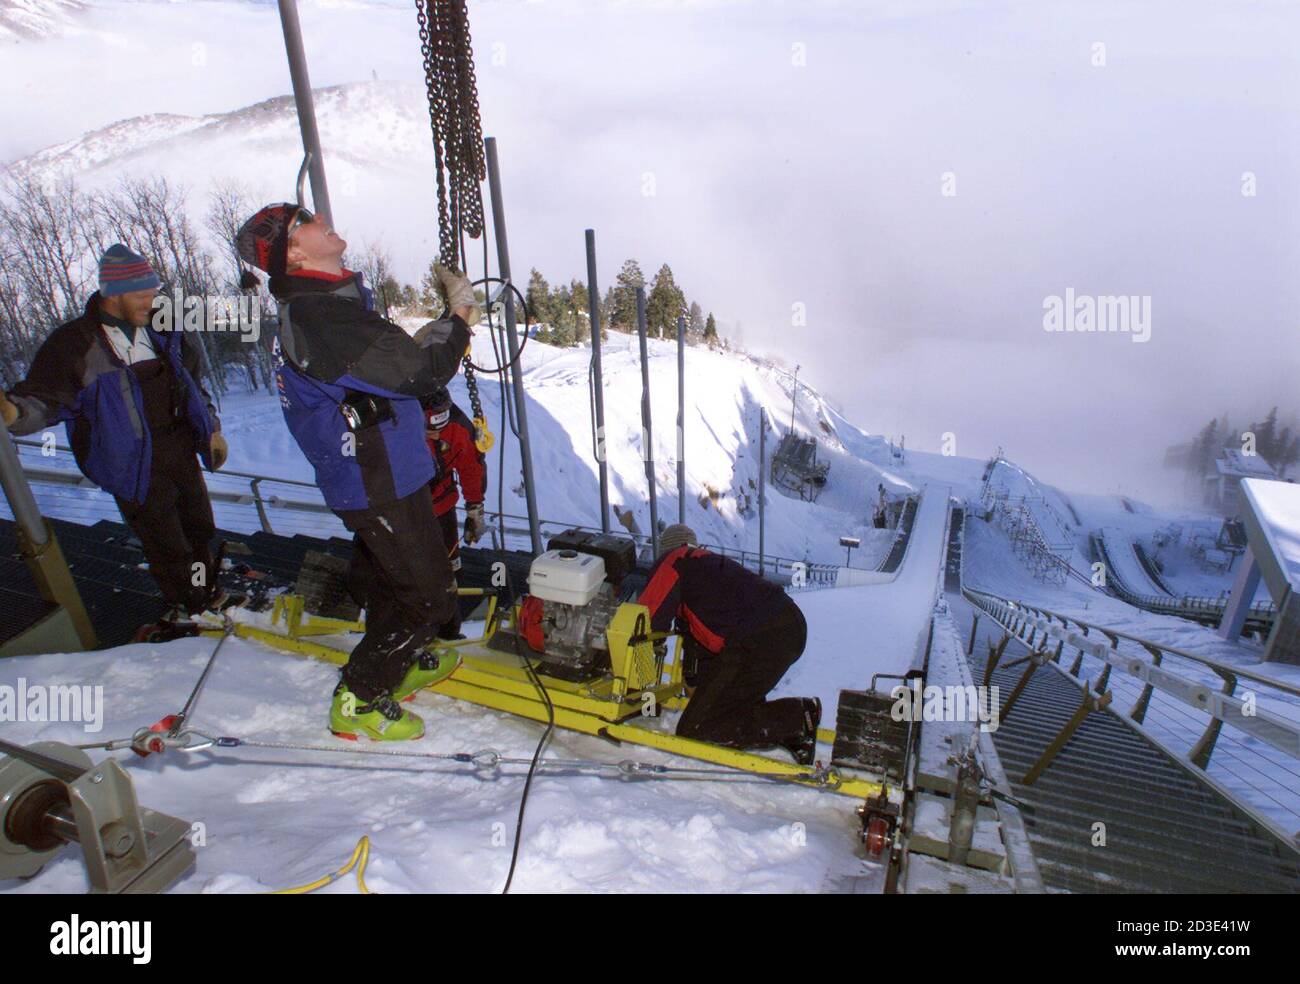 Garret Moe (C) and John Holmes (L) help install a motorized track layer at the top of the 120m ski jump at Utah Olympic Park, December 18, 2001. The motorized device lays ski tracks down the middle of the jump. The Olympic Park site will host ski jumping as well as all bobsleigh, luge and skeleton events from February 8-23, 2002. The XIX Olympic Winter Games are scheduled to run from February 8-24, 2002. REUTERS/Mike Blake  MB/HB Stock Photo